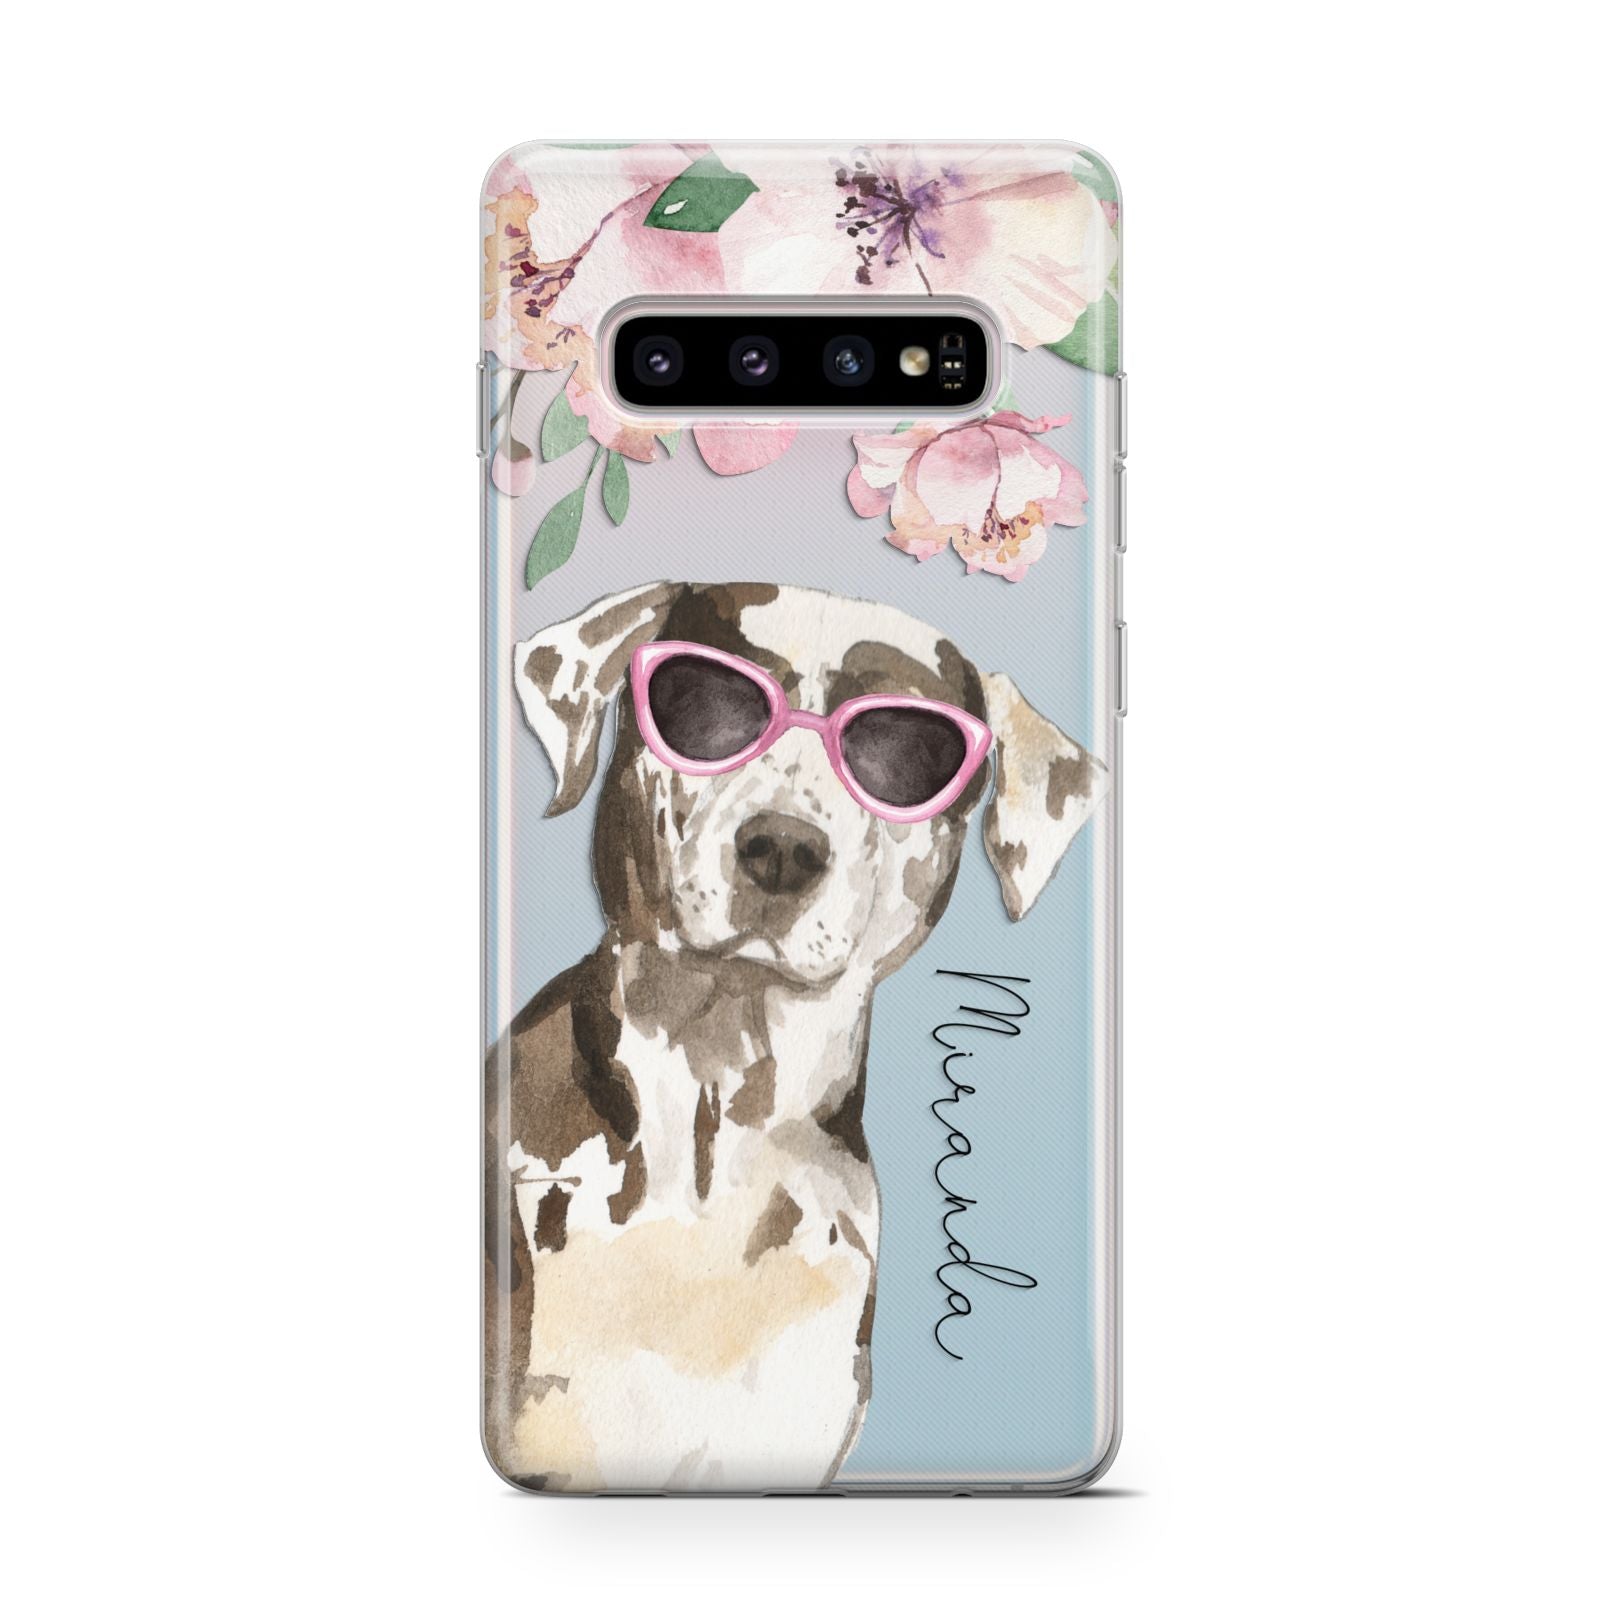 Personalised Catahoula Leopard Dog Samsung Galaxy S10 Case